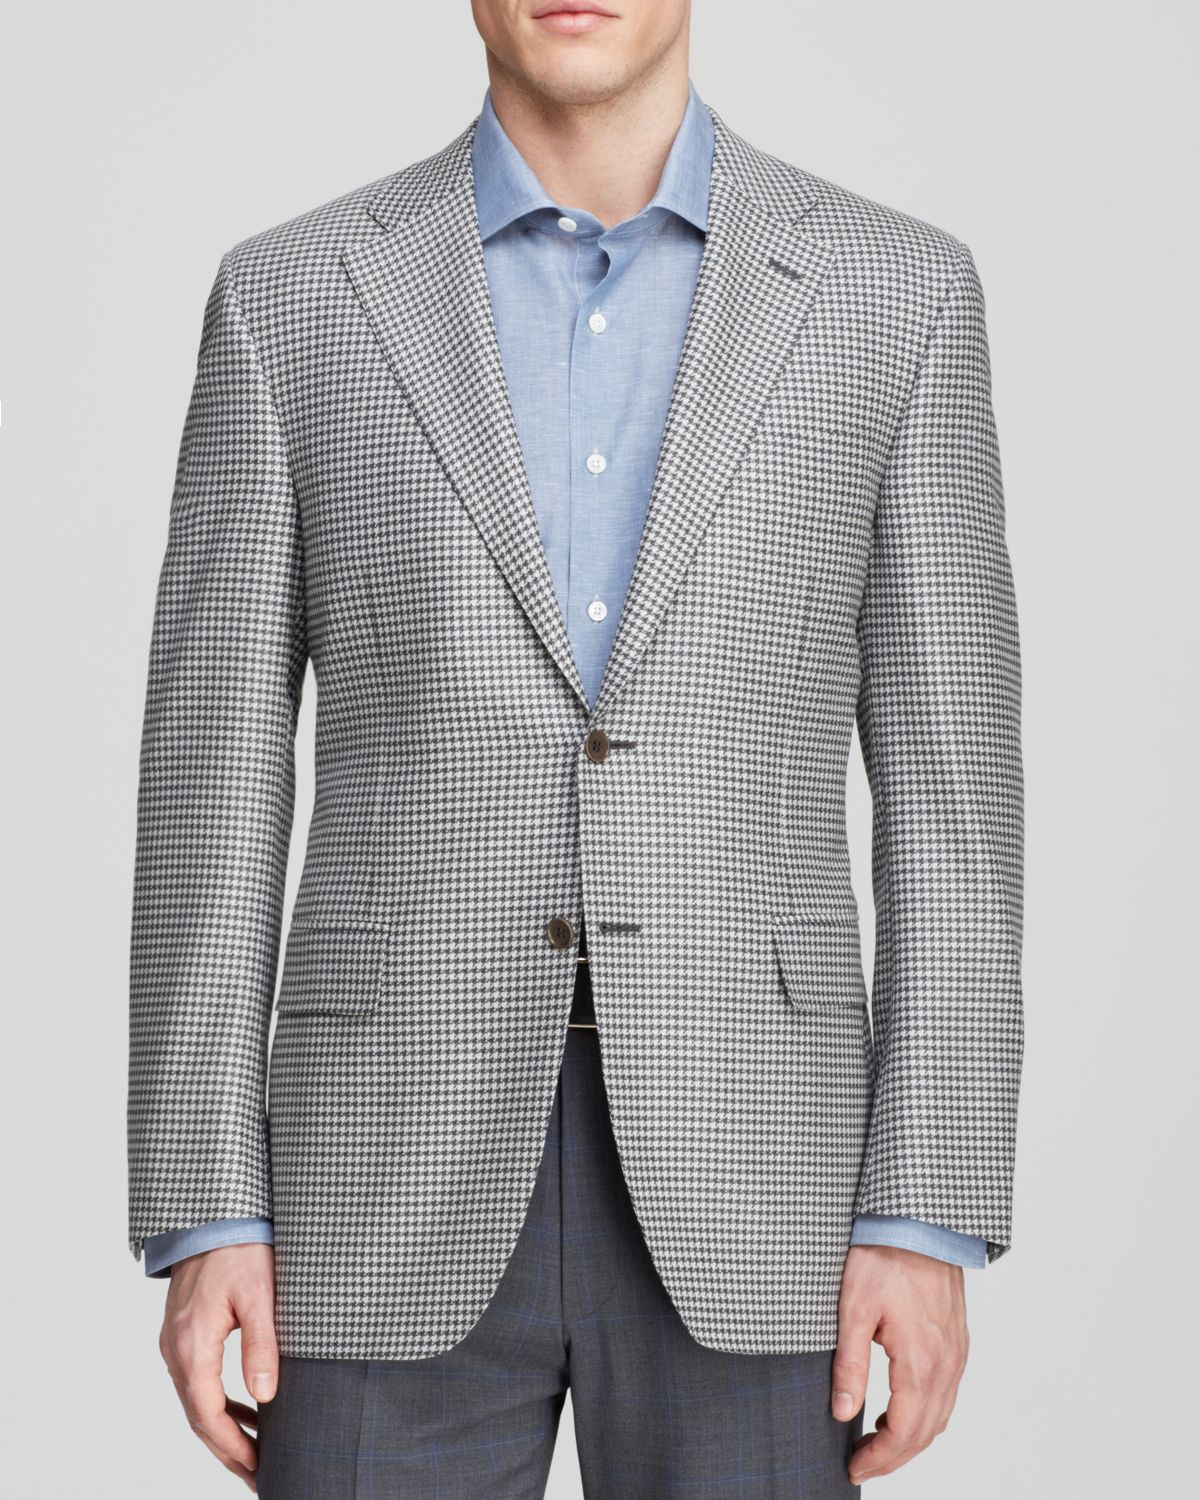 Canali Houndstooth Sport Coat - Classic Fit in Grey/Cream (Gray) for Men -  Lyst